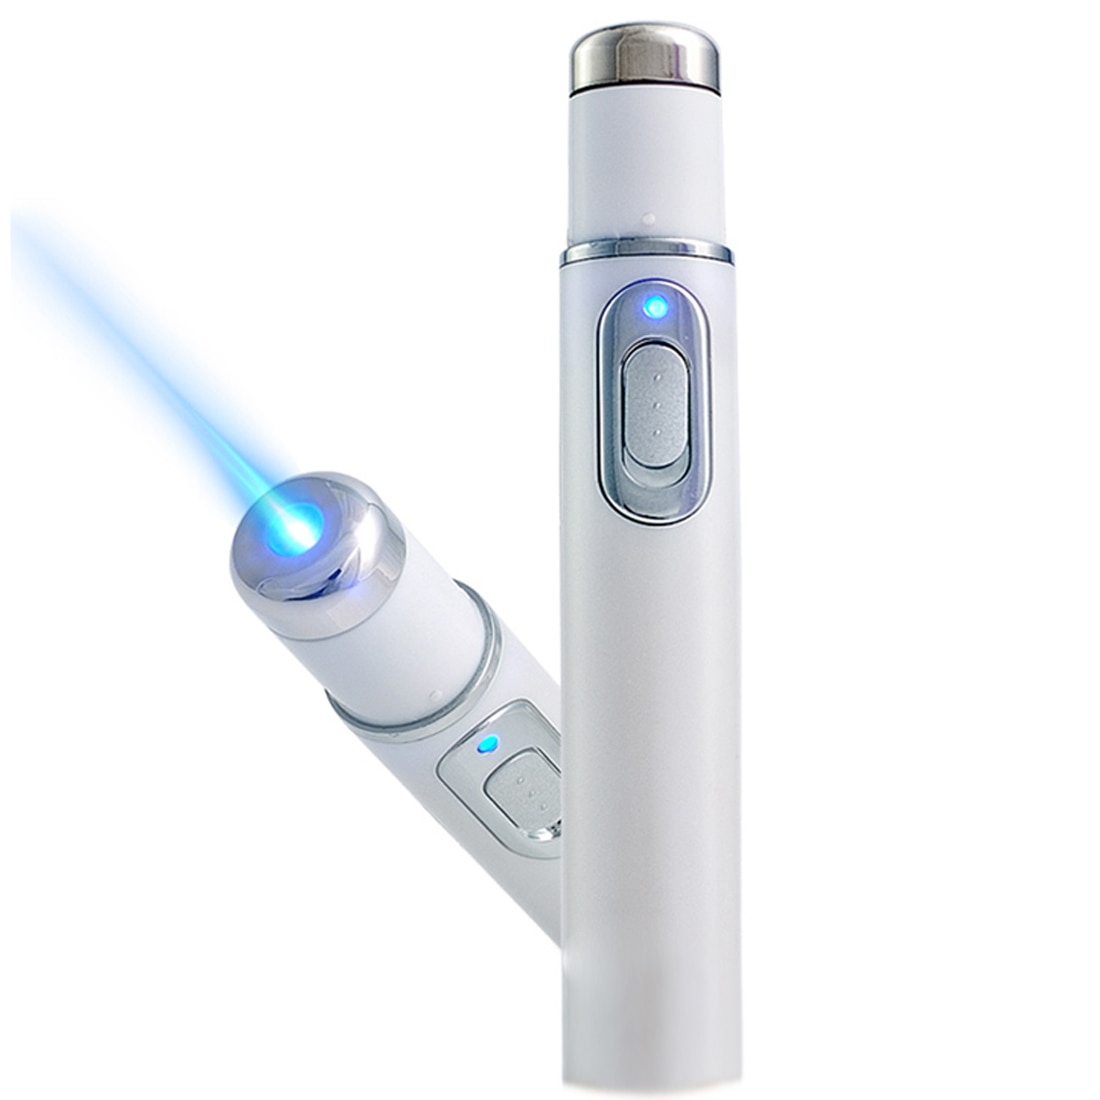 Acne Laser Pen Portable Wrinkle Removal Machine Durable Soft Scar Remover Device Blue Light Therapy Pen Massage Relax KD-7910